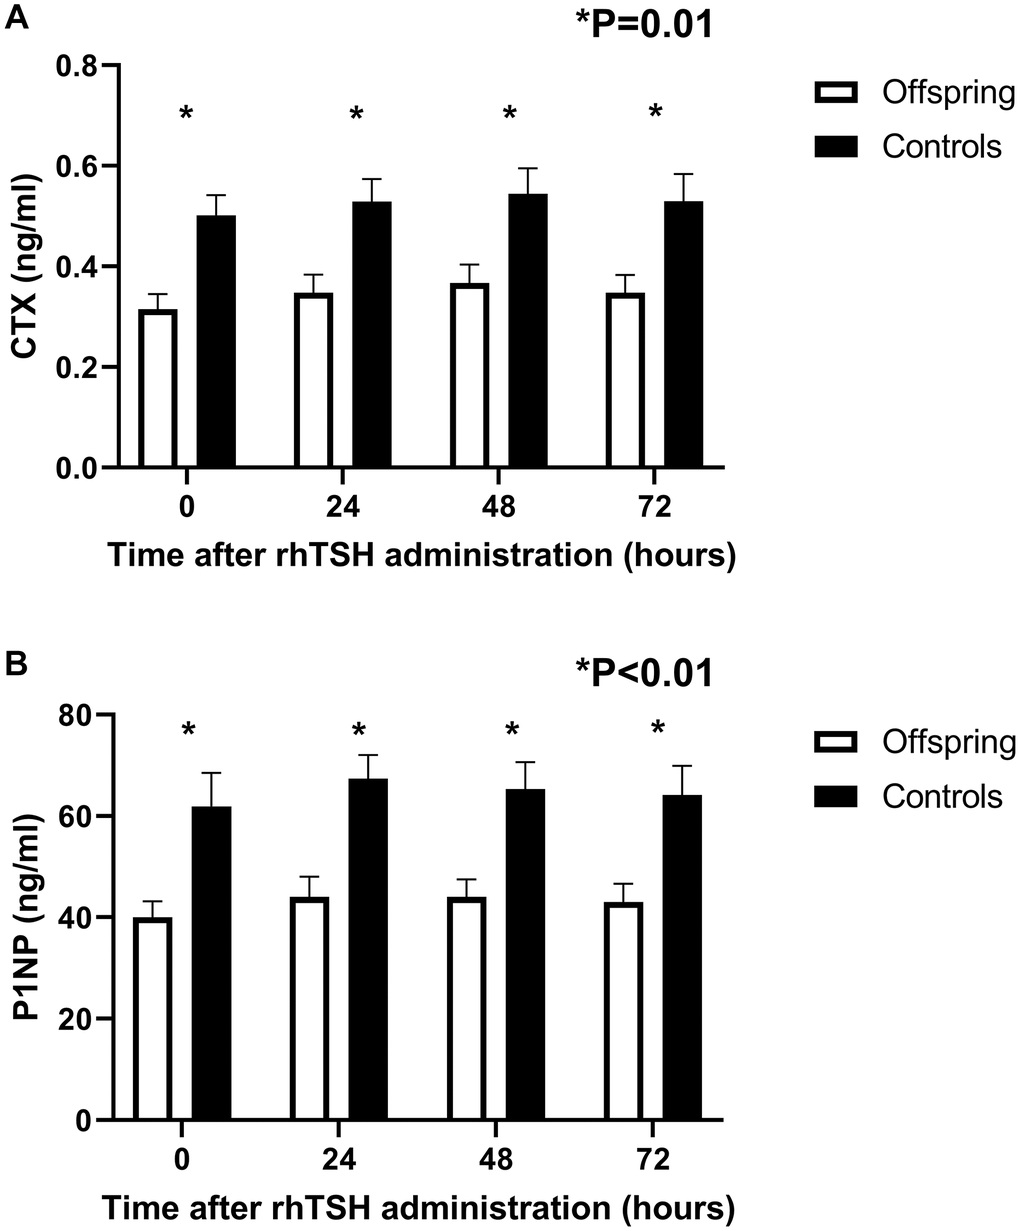 Concentration profiles of bone resorption (CTX) and bone formation (P1NP) markers over time in offspring from long-lived families (n = 14) and controls (n = 12) following a challenge with 0.1 mg rhTSH. (A) Mean circulating CTX at 24-hour intervals following rhTSH administration. (B) Mean circulating P1NP at 24-hour intervals following rhTSH administration. rhTSH: recombinant human thyroid stimulating hormone, CTX: collagen type 1 C-terminal cross-linked telopeptide (CTX), P1NP: N-terminal propeptide of type 1 collagen. Error bars: standard error of the mean.